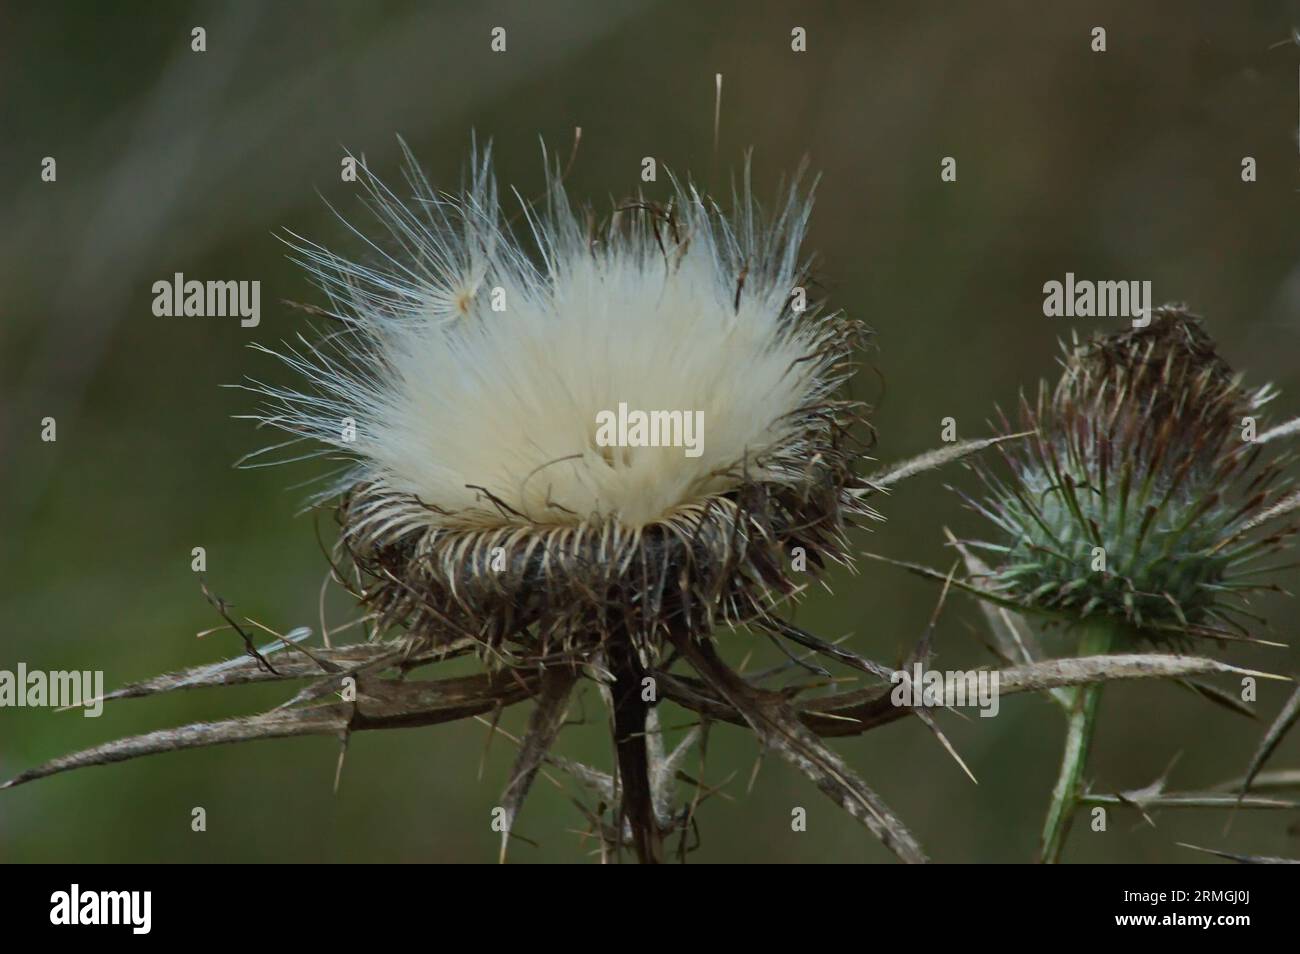 Milk thistle or silybum marianum  forming seeds after flowering in a summer meadow, Sofia, Bulgaria Stock Photo